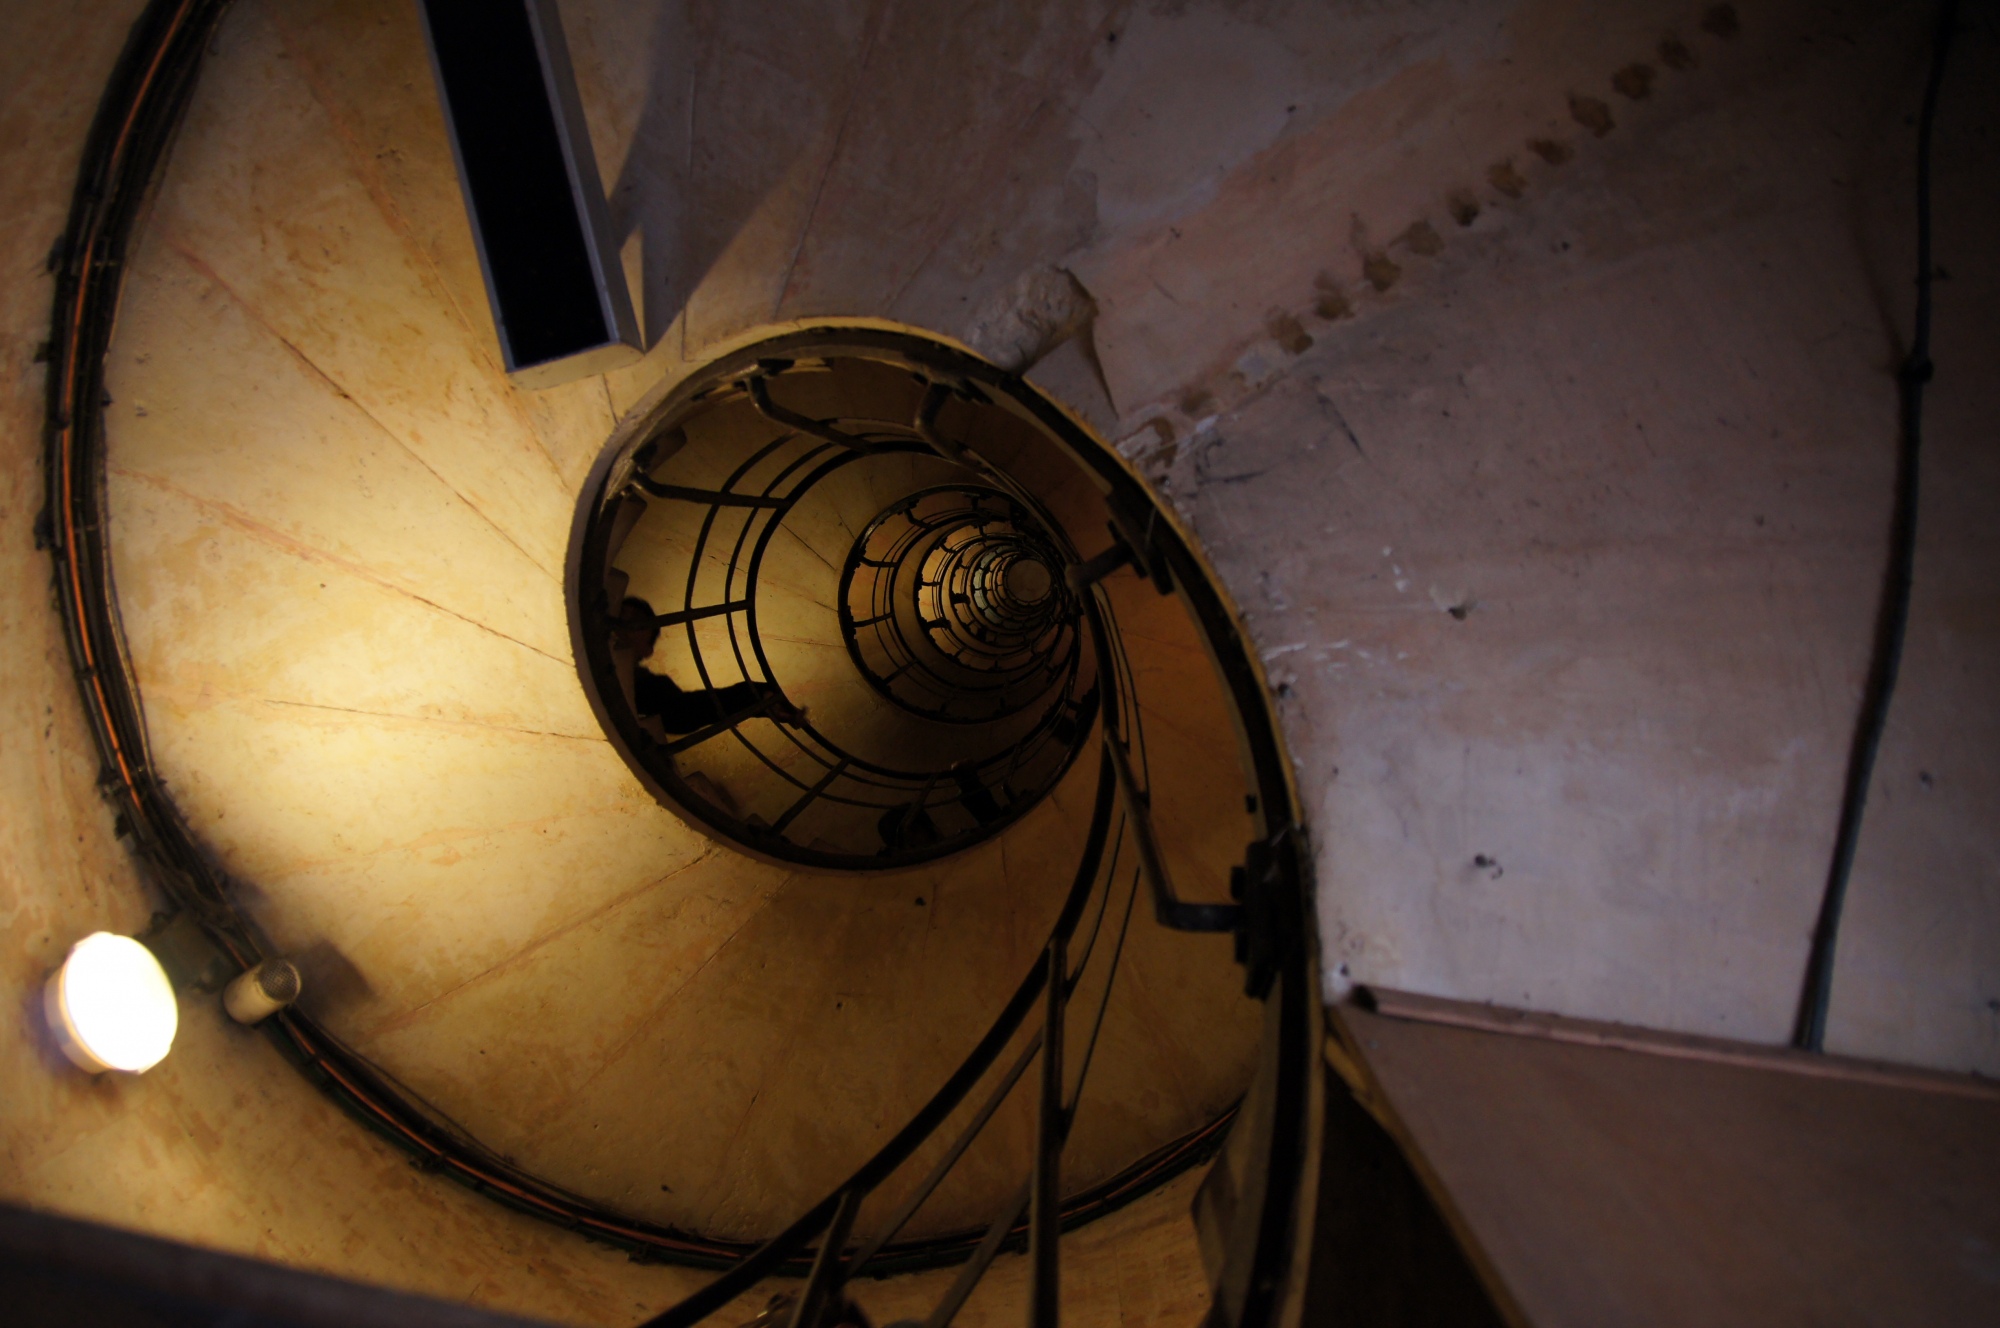 Stairs up the Arc de Triomphe